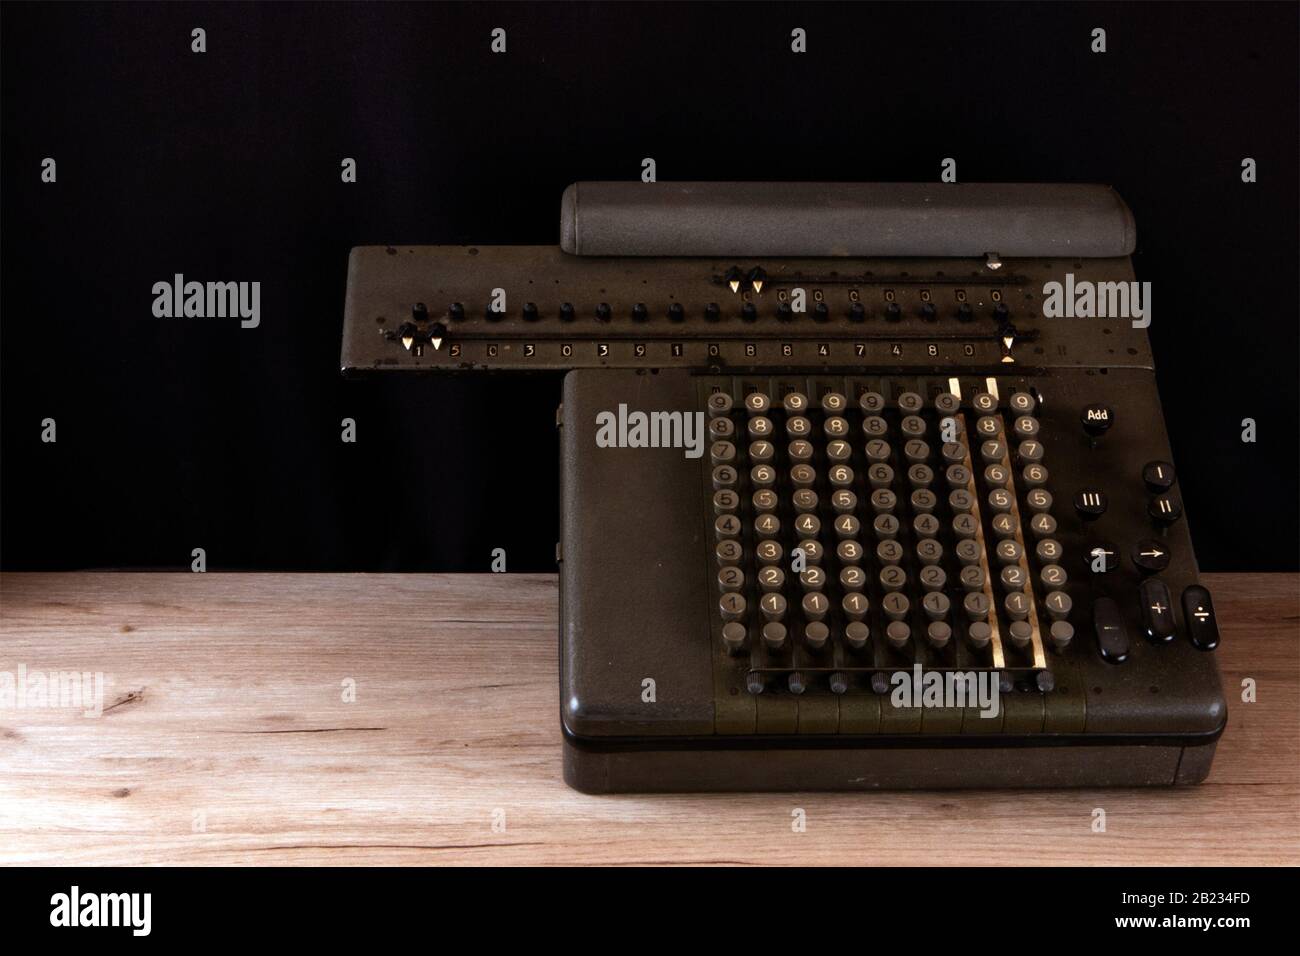 https://c8.alamy.com/comp/2B234FD/old-counting-mechanism-dusty-vintage-arithmometer-standing-on-a-wooden-board-against-black-fabric-2B234FD.jpg